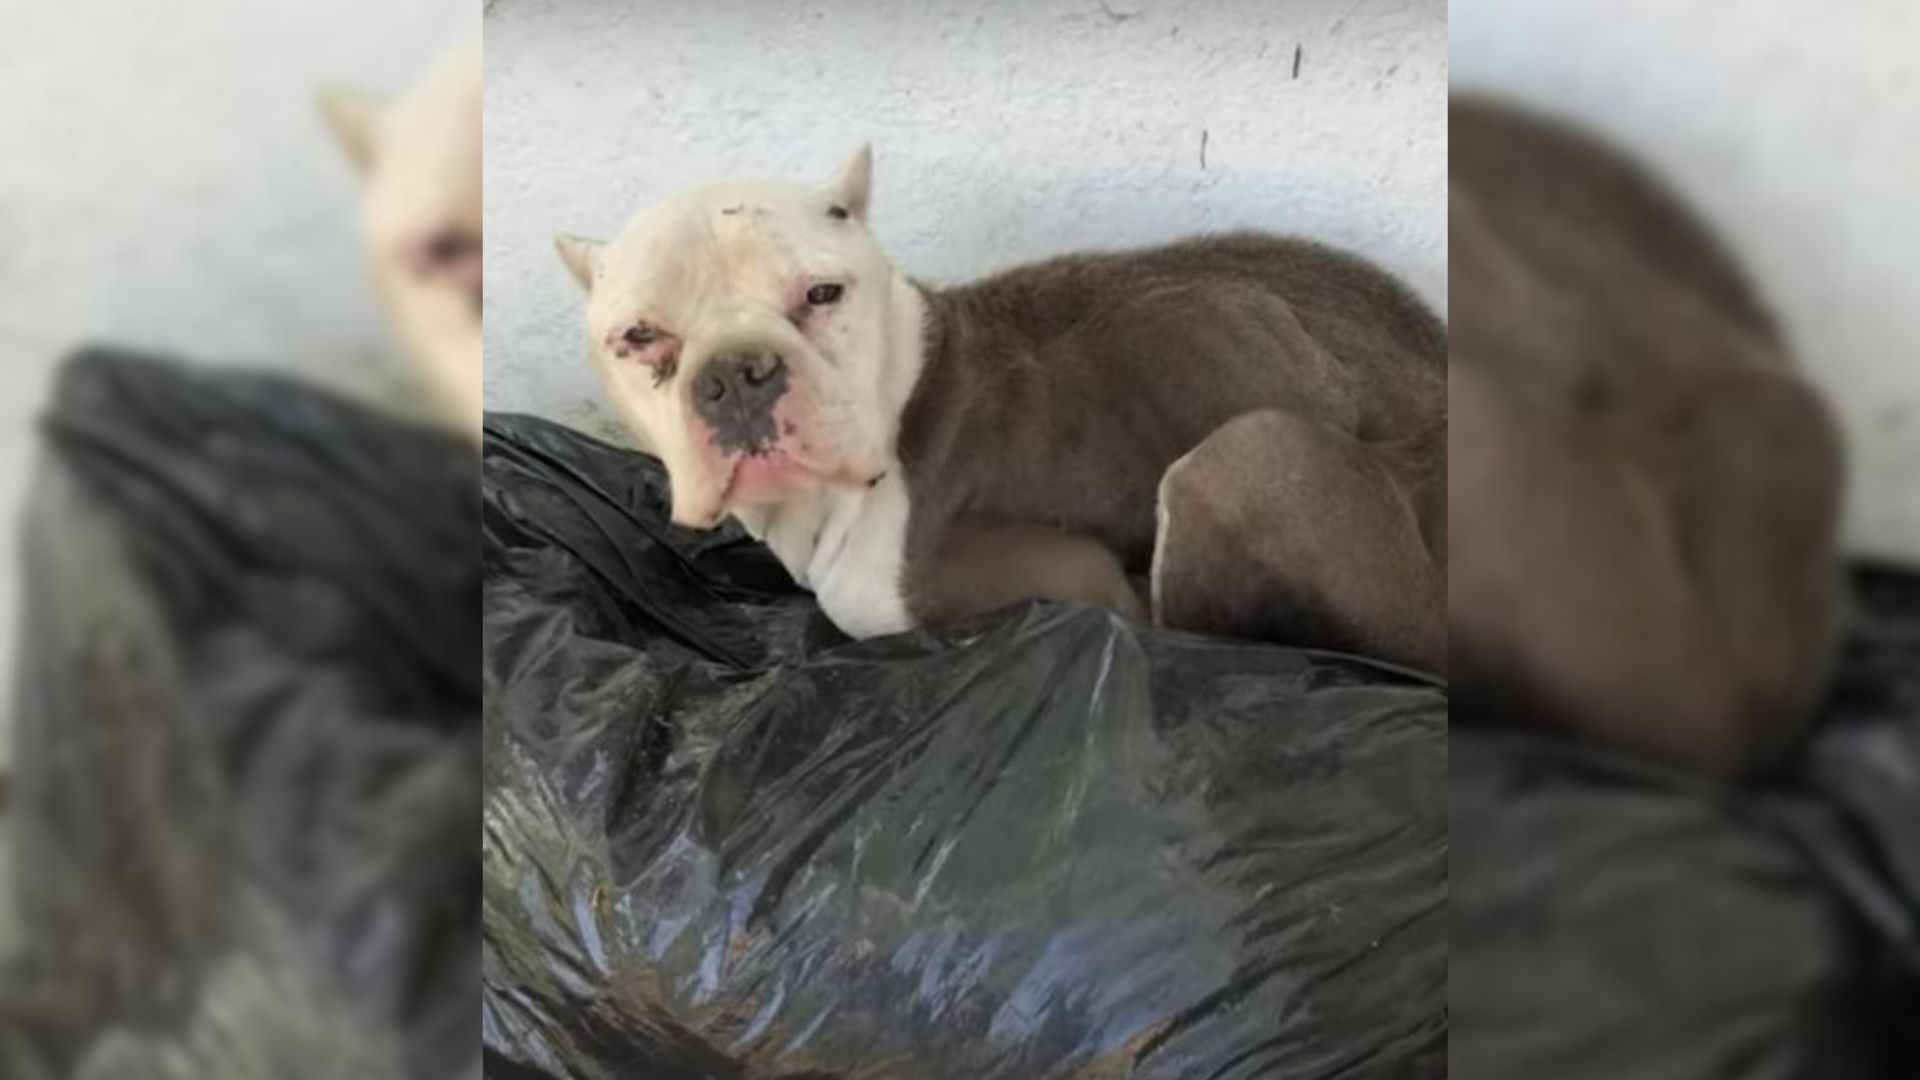 Rescuers Couldn’t Believe They Saw A Dog In A Pile Of Trash, So They Went To Her Aid